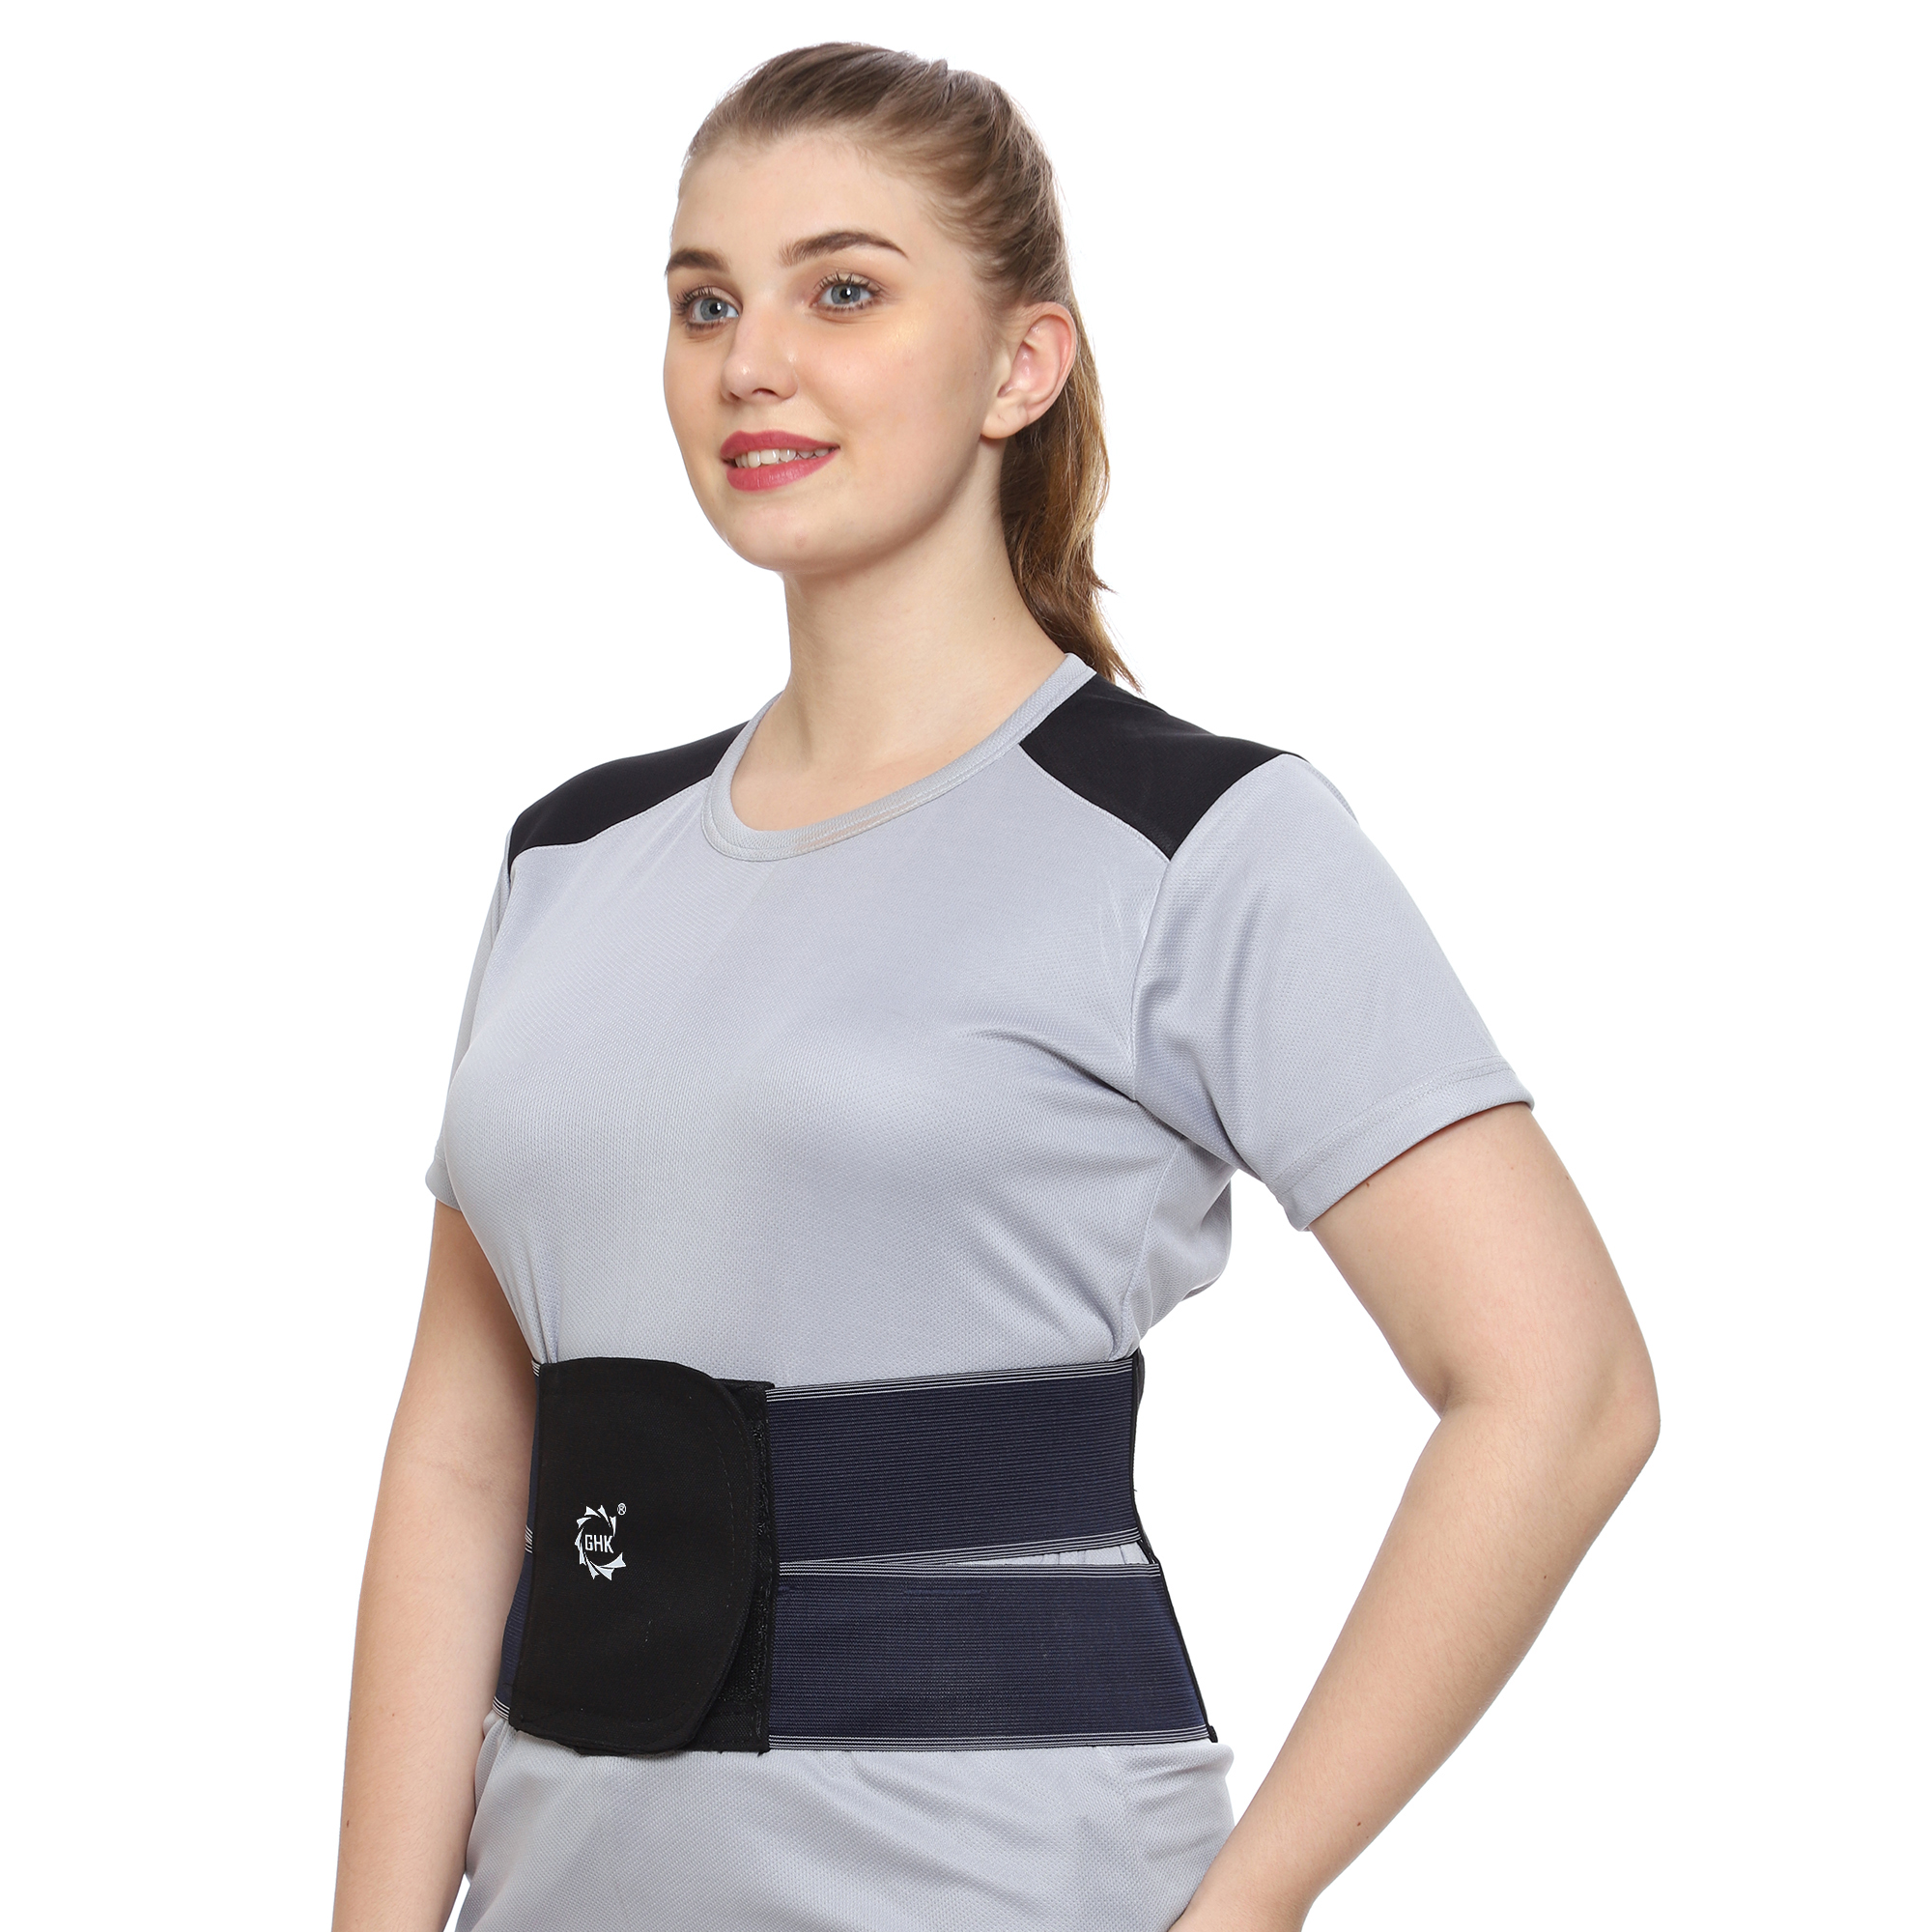 GHK H89 Acupressure Magnetic Belt for Back Support & Pain Relief Unisex Size : 28inch